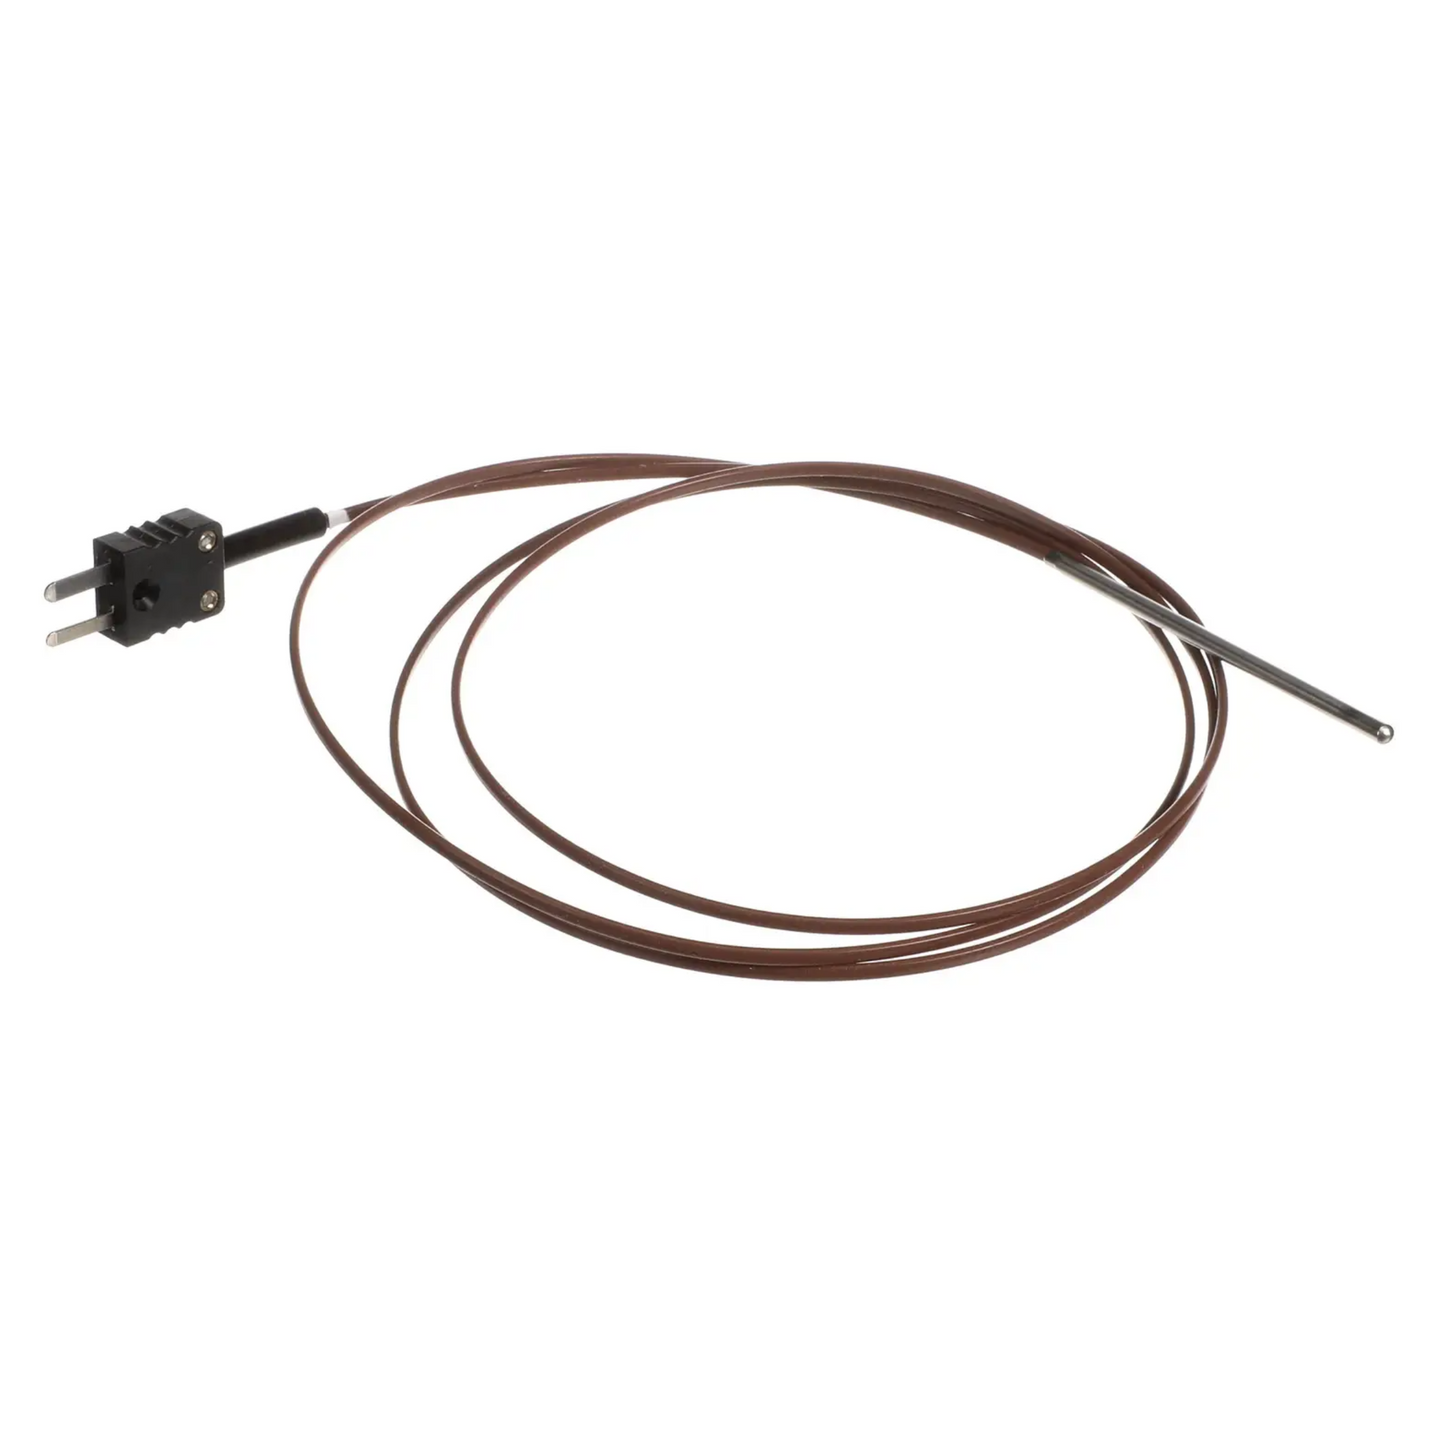 91D5363000 Thermocouple for "D" Series Warmer